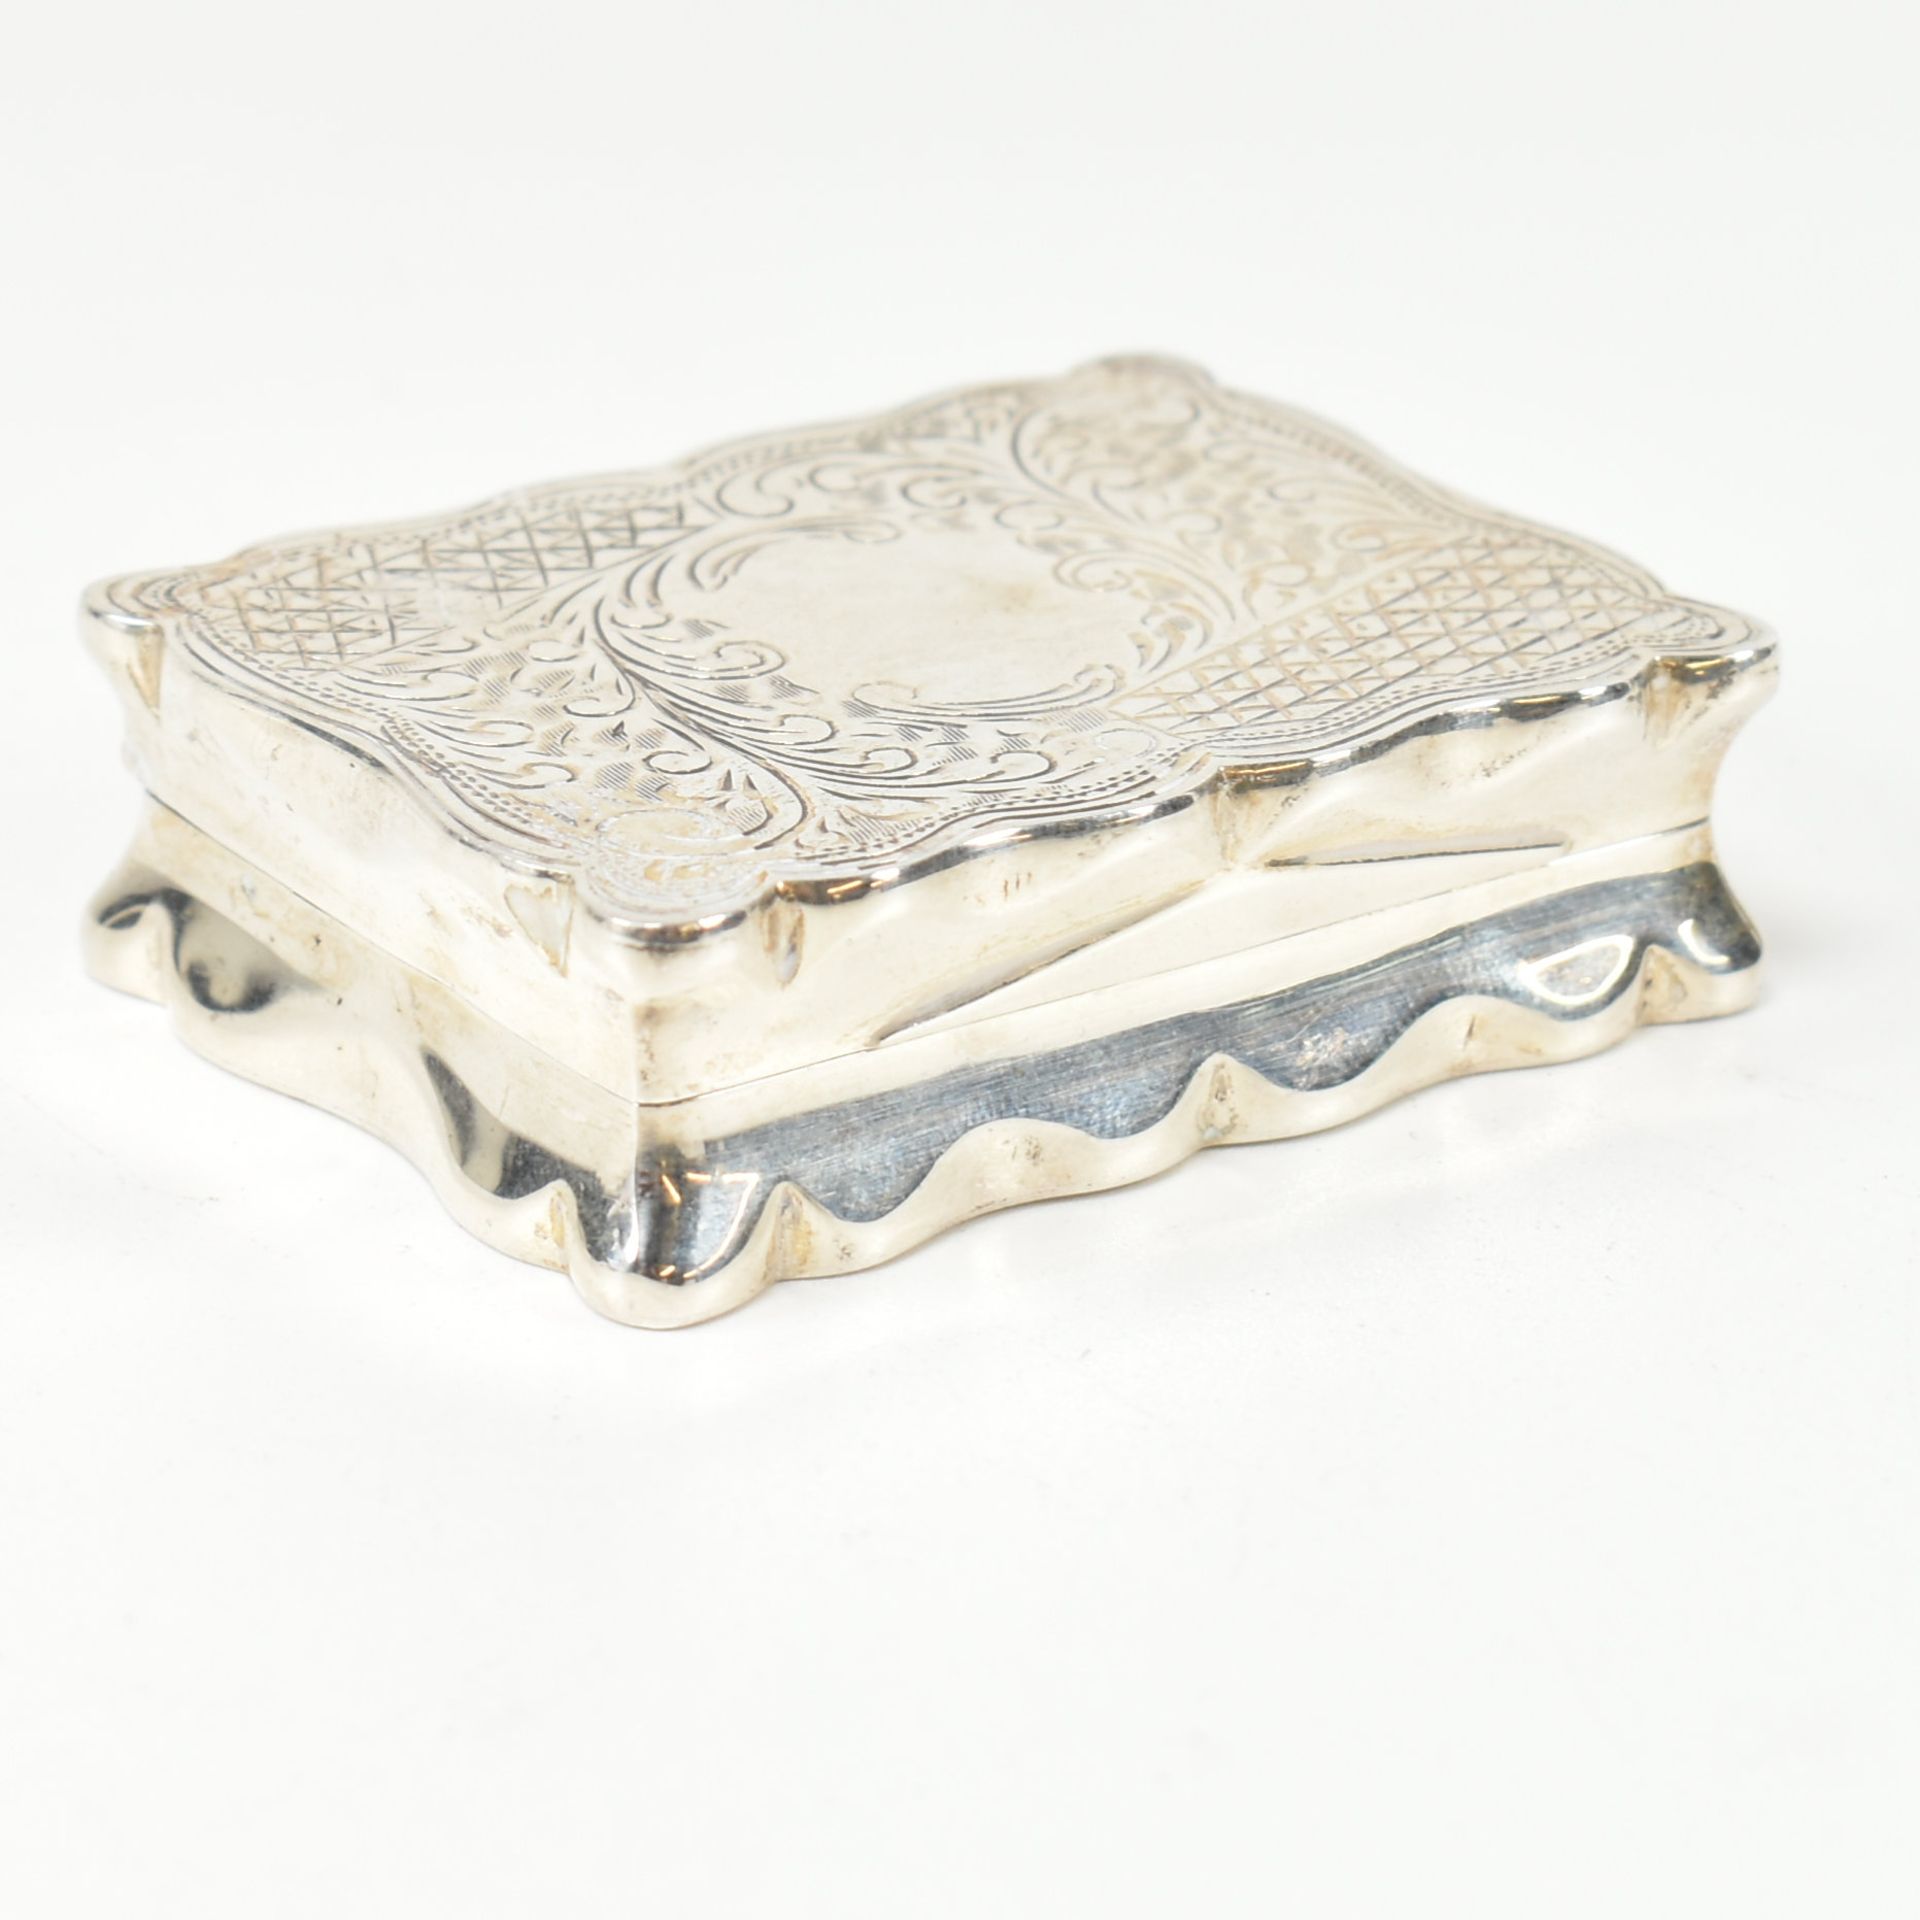 925 STERLING SILVER SNUFF BOX - Image 2 of 6